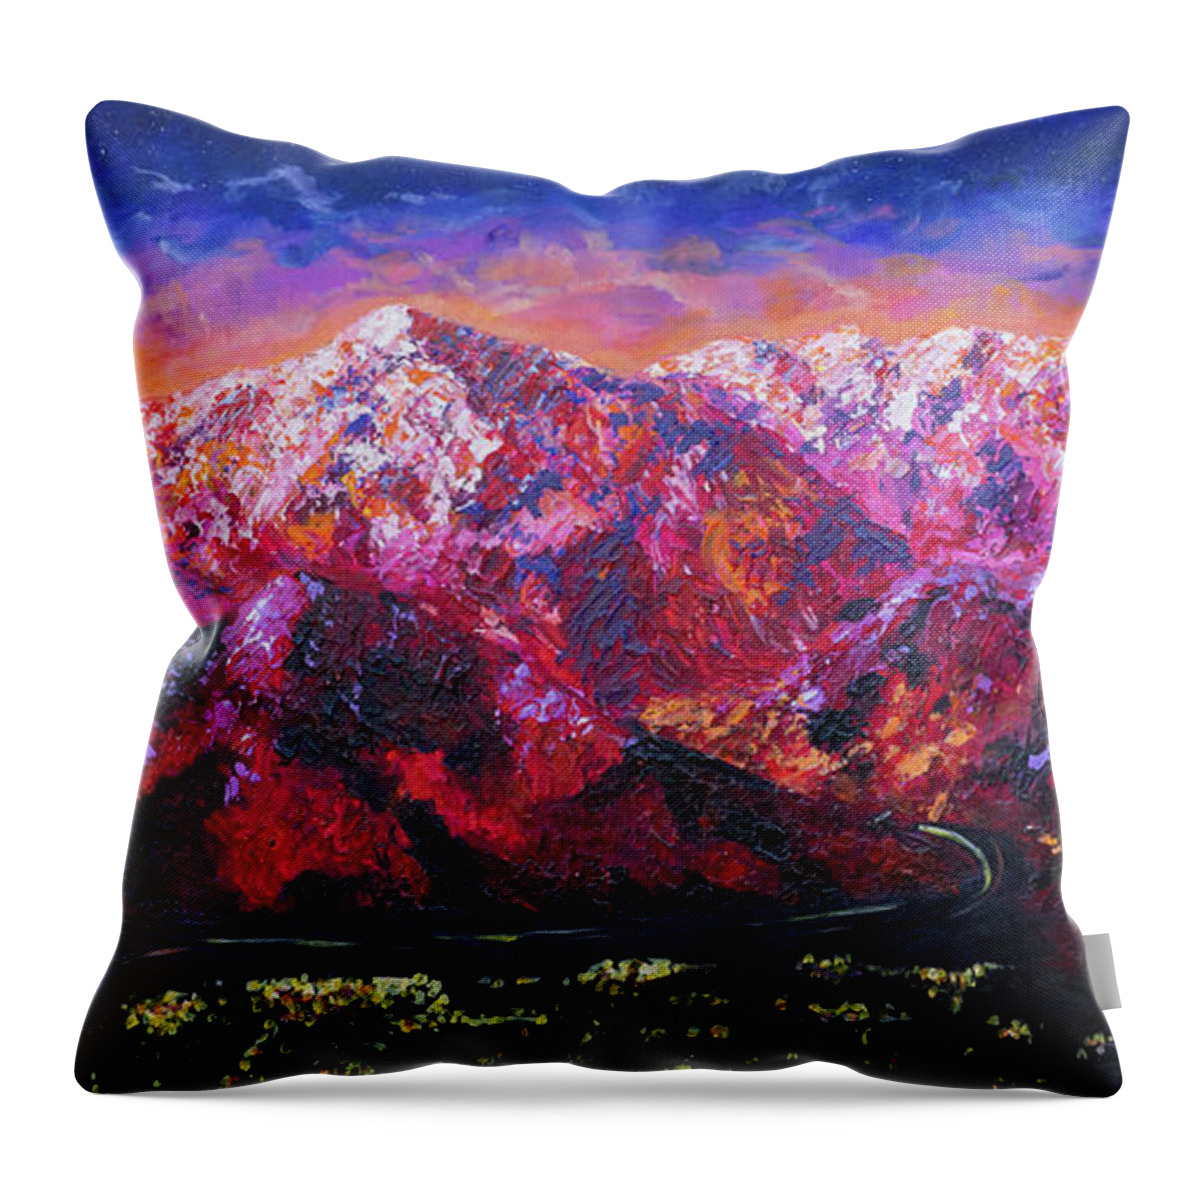 Mountain Throw Pillow featuring the painting What Dreams May Come by Ashley Wright